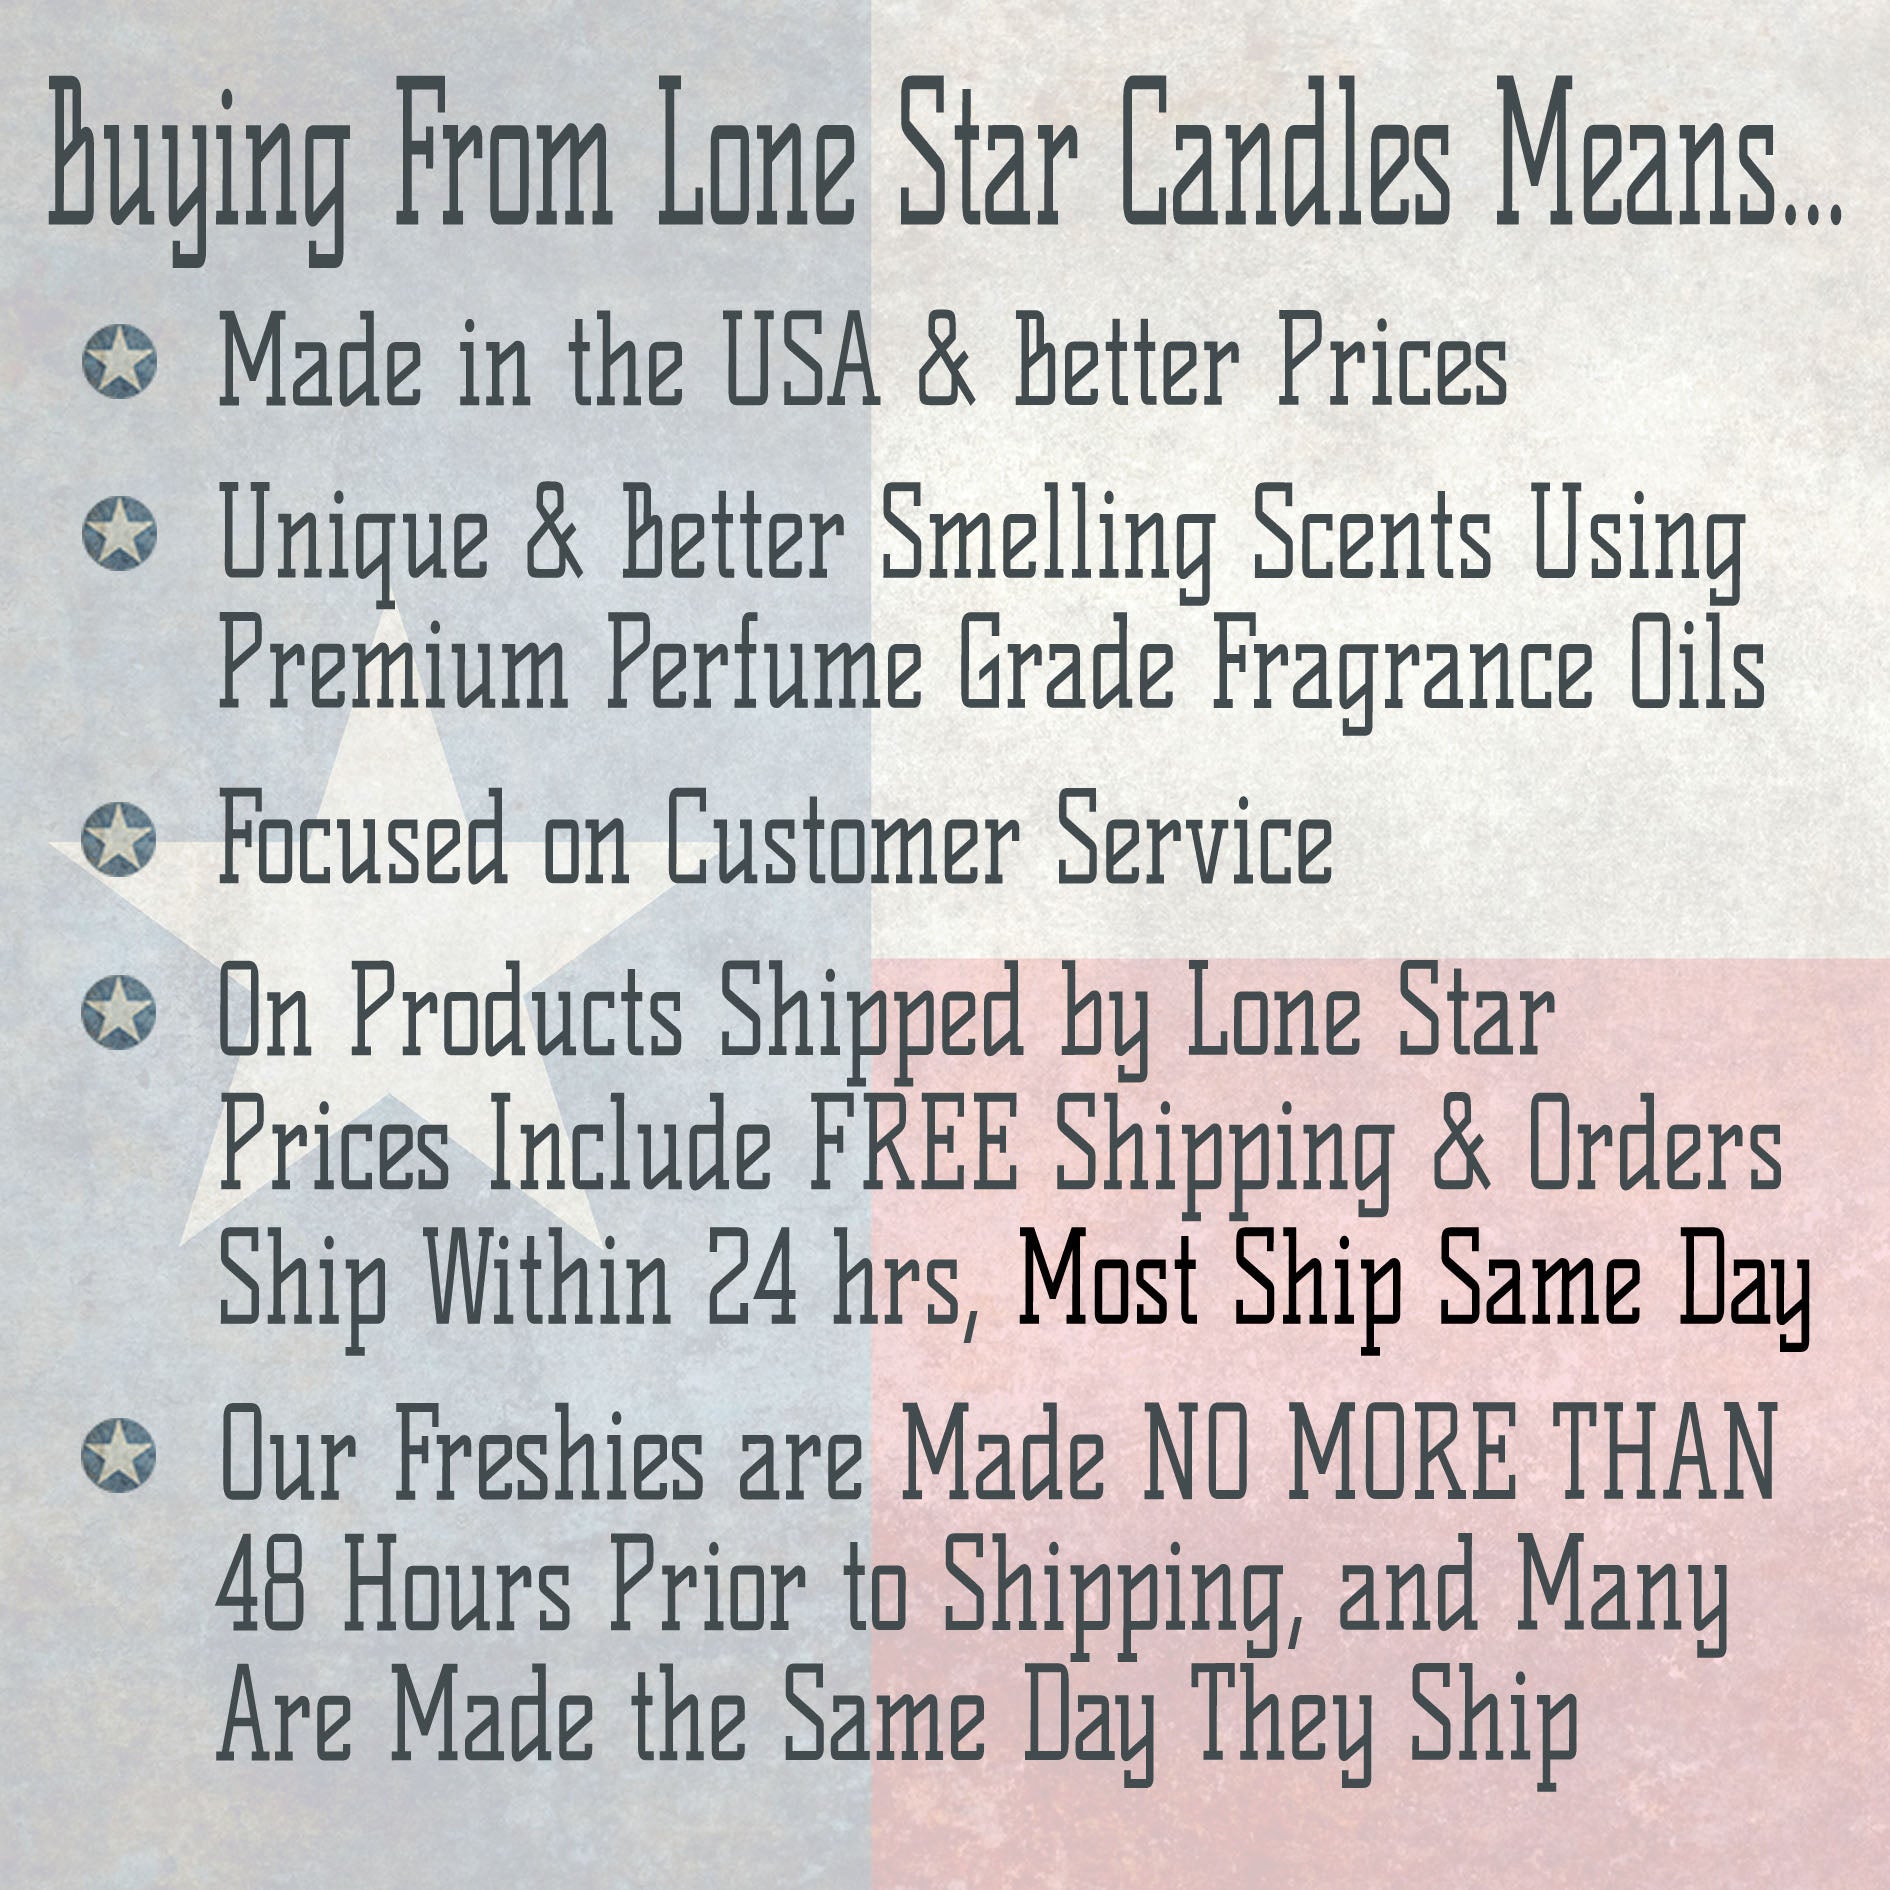 Cranberries & Sandalwood, Lone Star Candles & More's Premium Strongly Scented Freshies, A Delightful Mix of Spiced Cranberry, & Sandalwood, Car & Air Freshener, USA Made in Texas, Pig 1-Pack